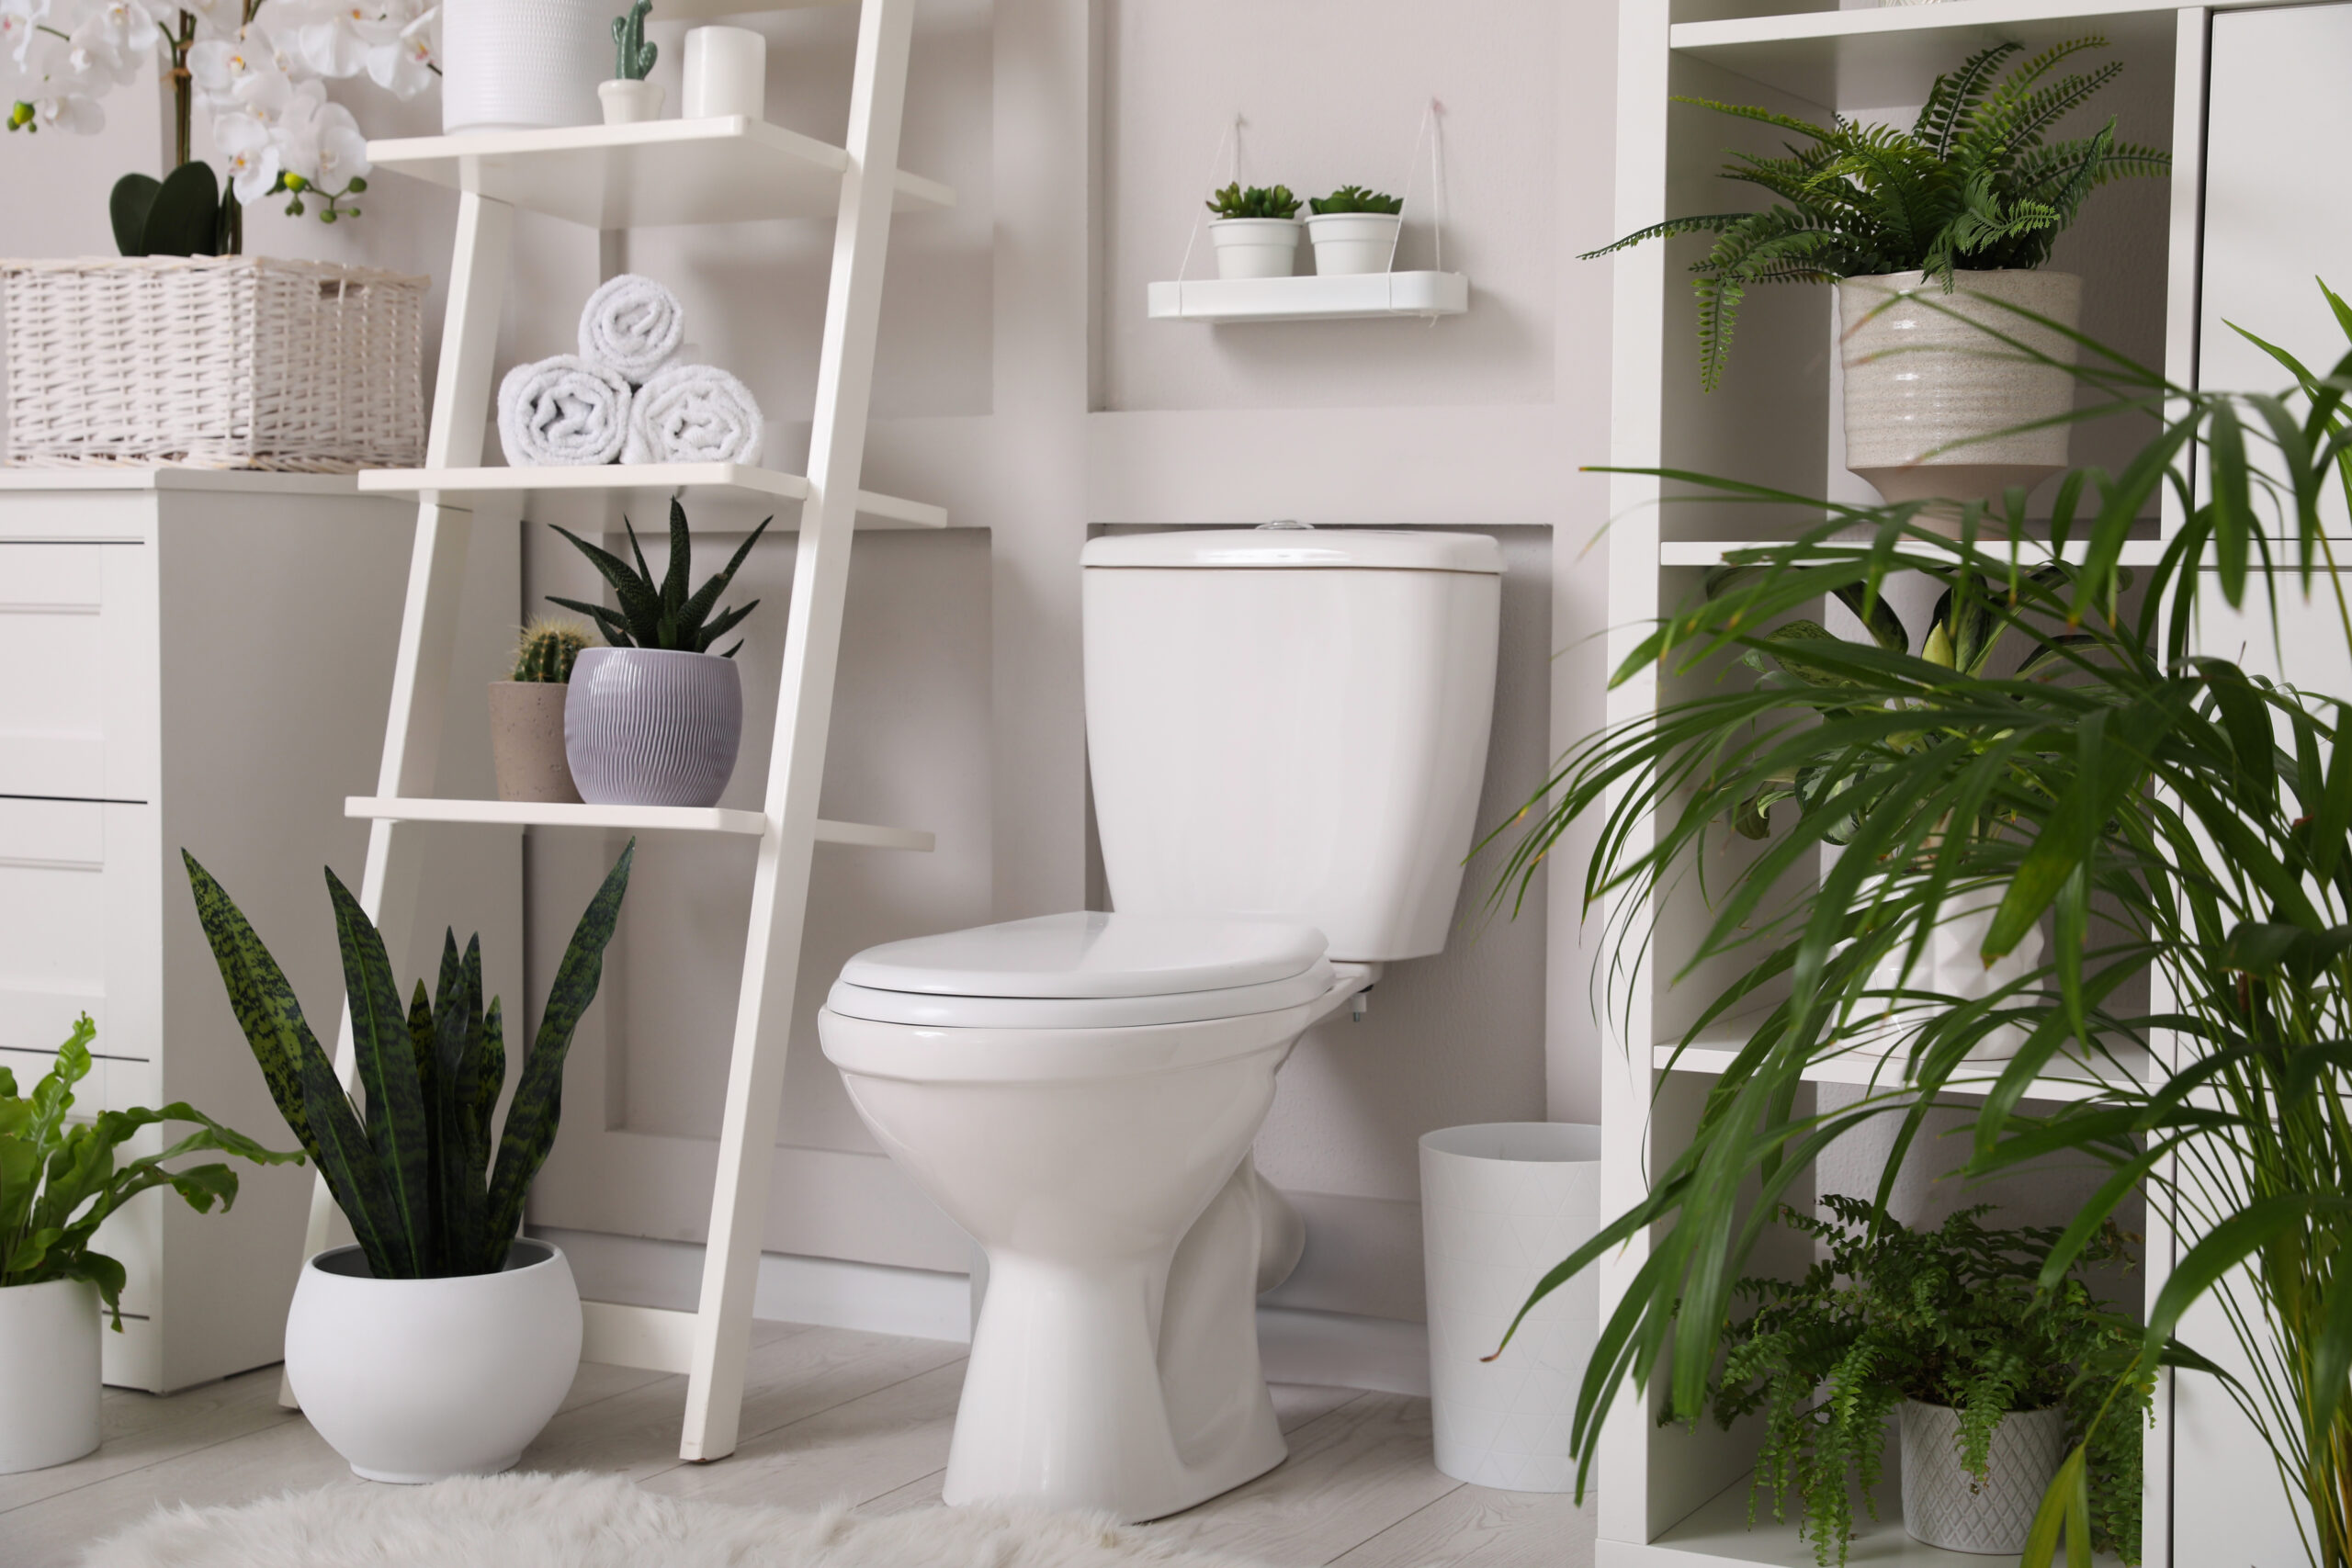 What is a Pressure-Assisted Toilet and Why Would You Need One?